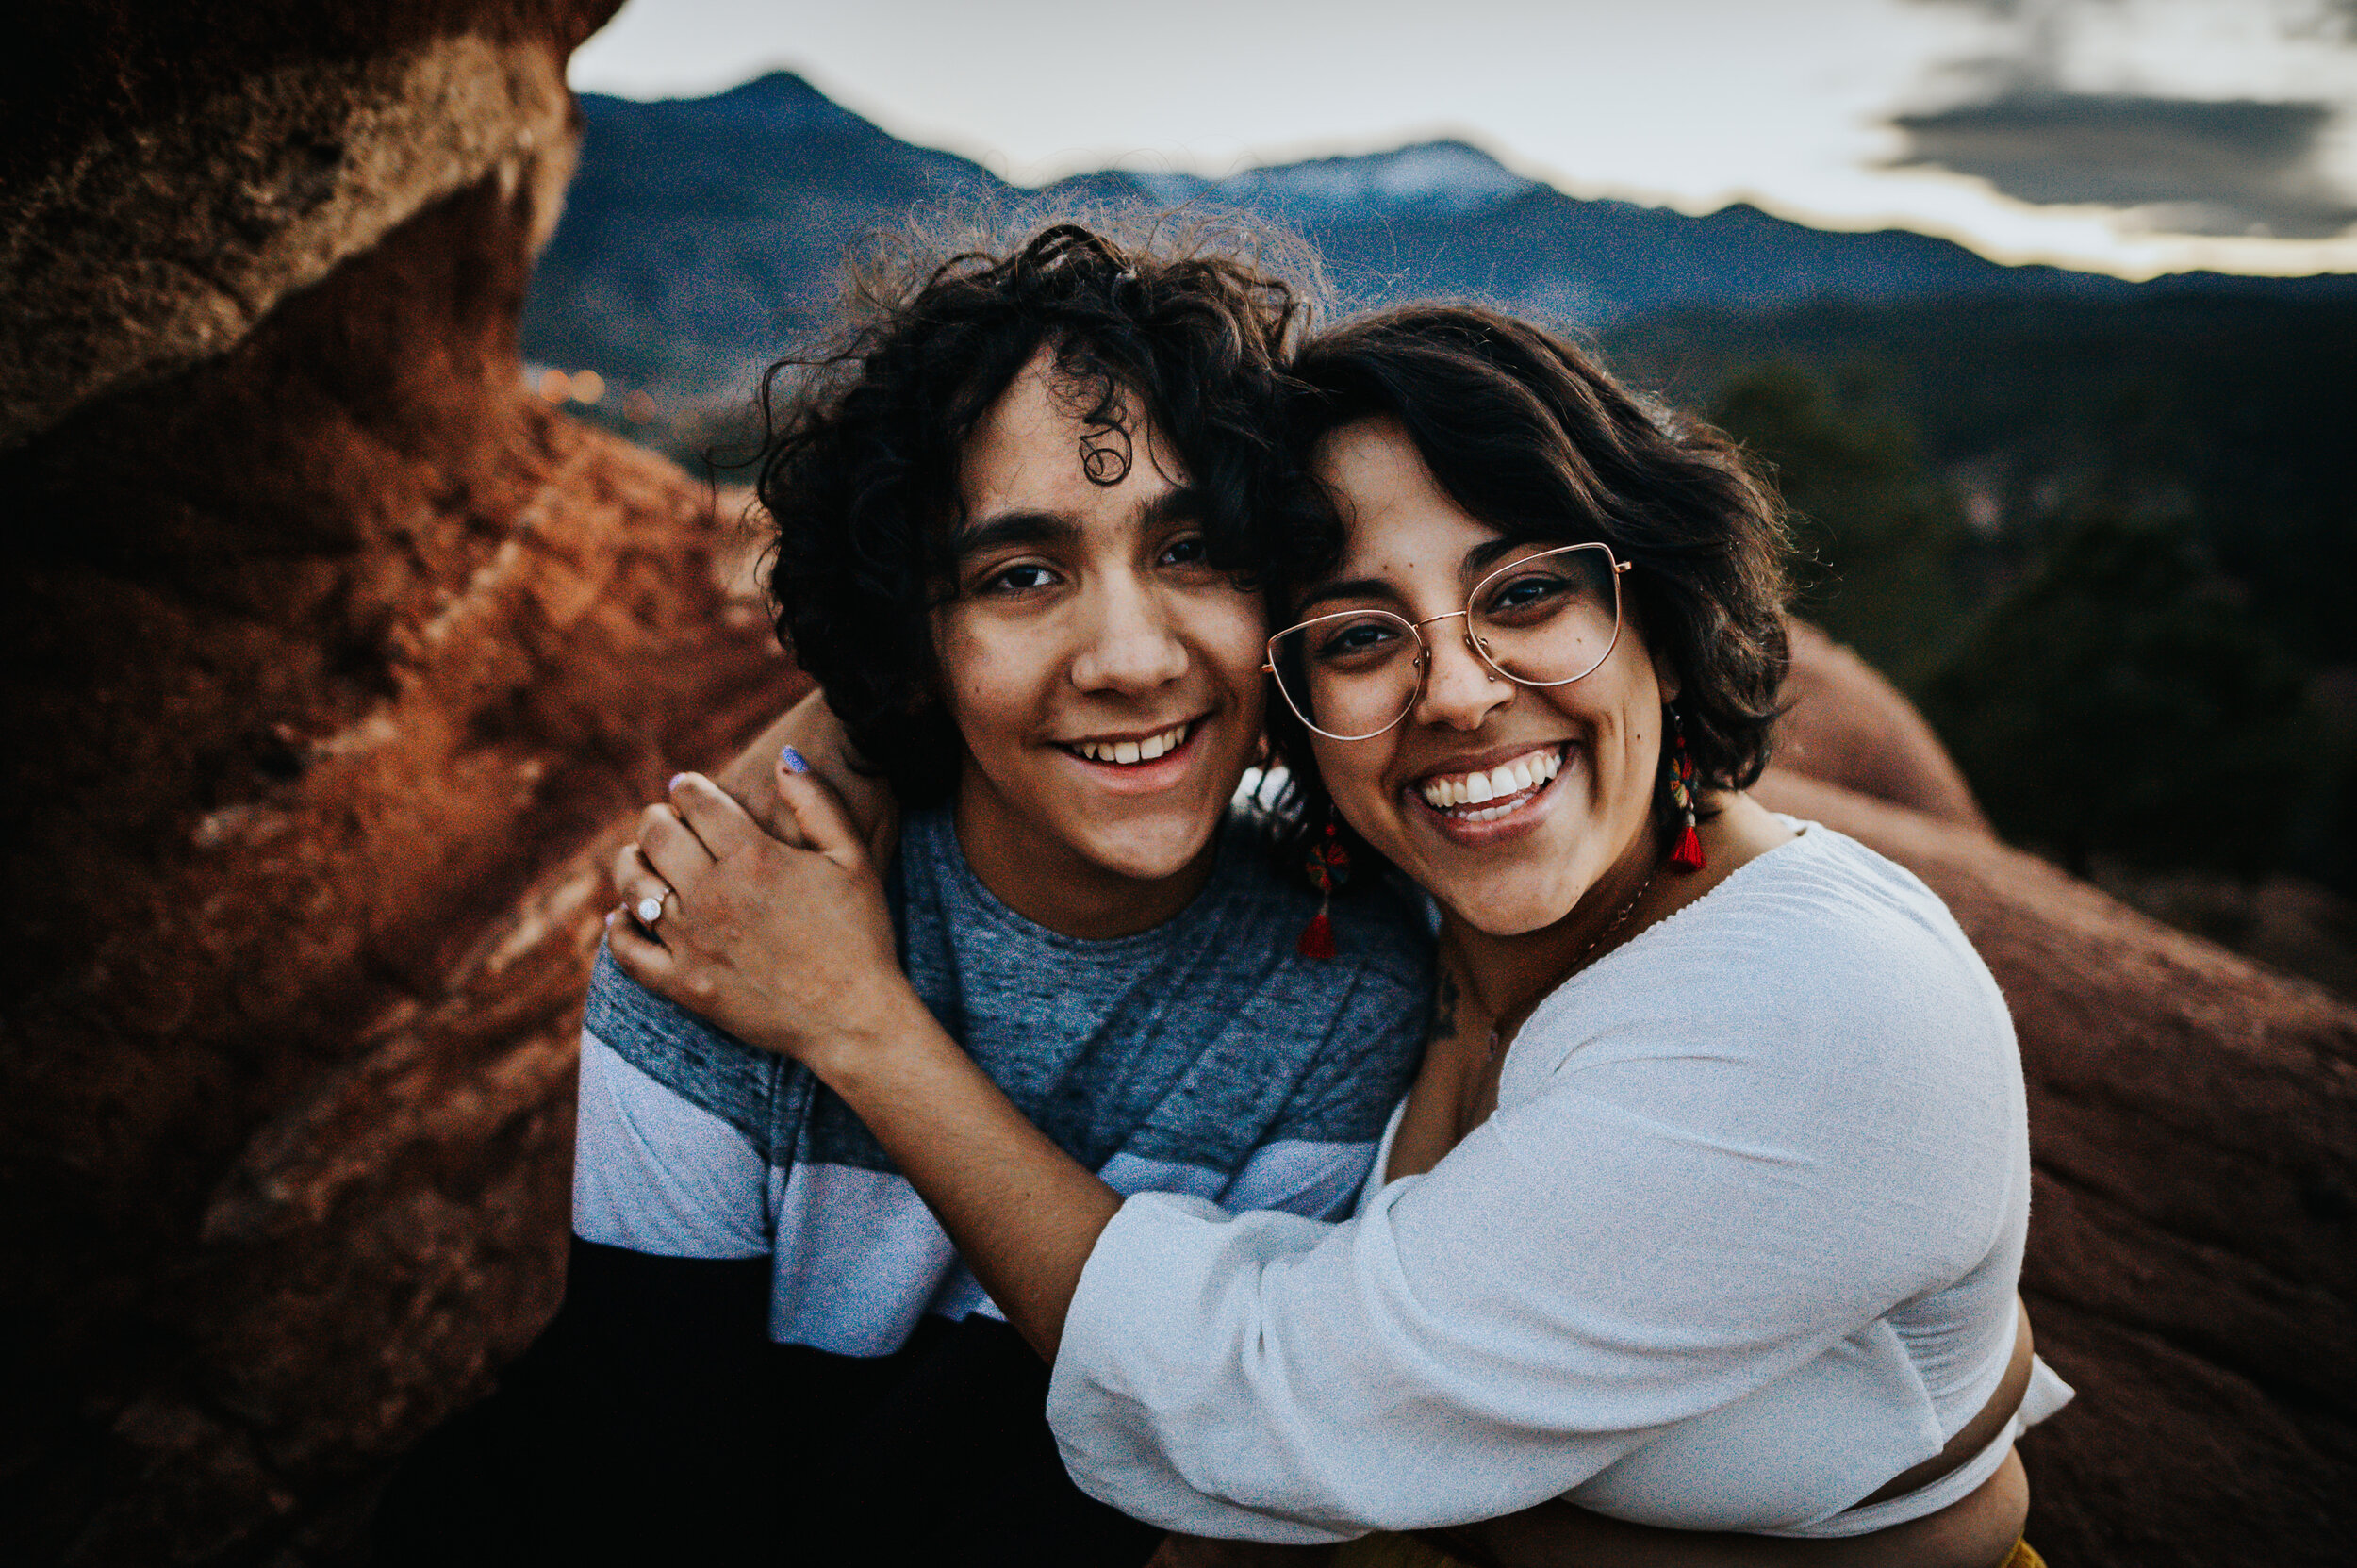 Caroline and Tommy Engagement Session Colorado Springs Colorado Garden of the Gods Wild Prairie Photography-21-2021.jpg